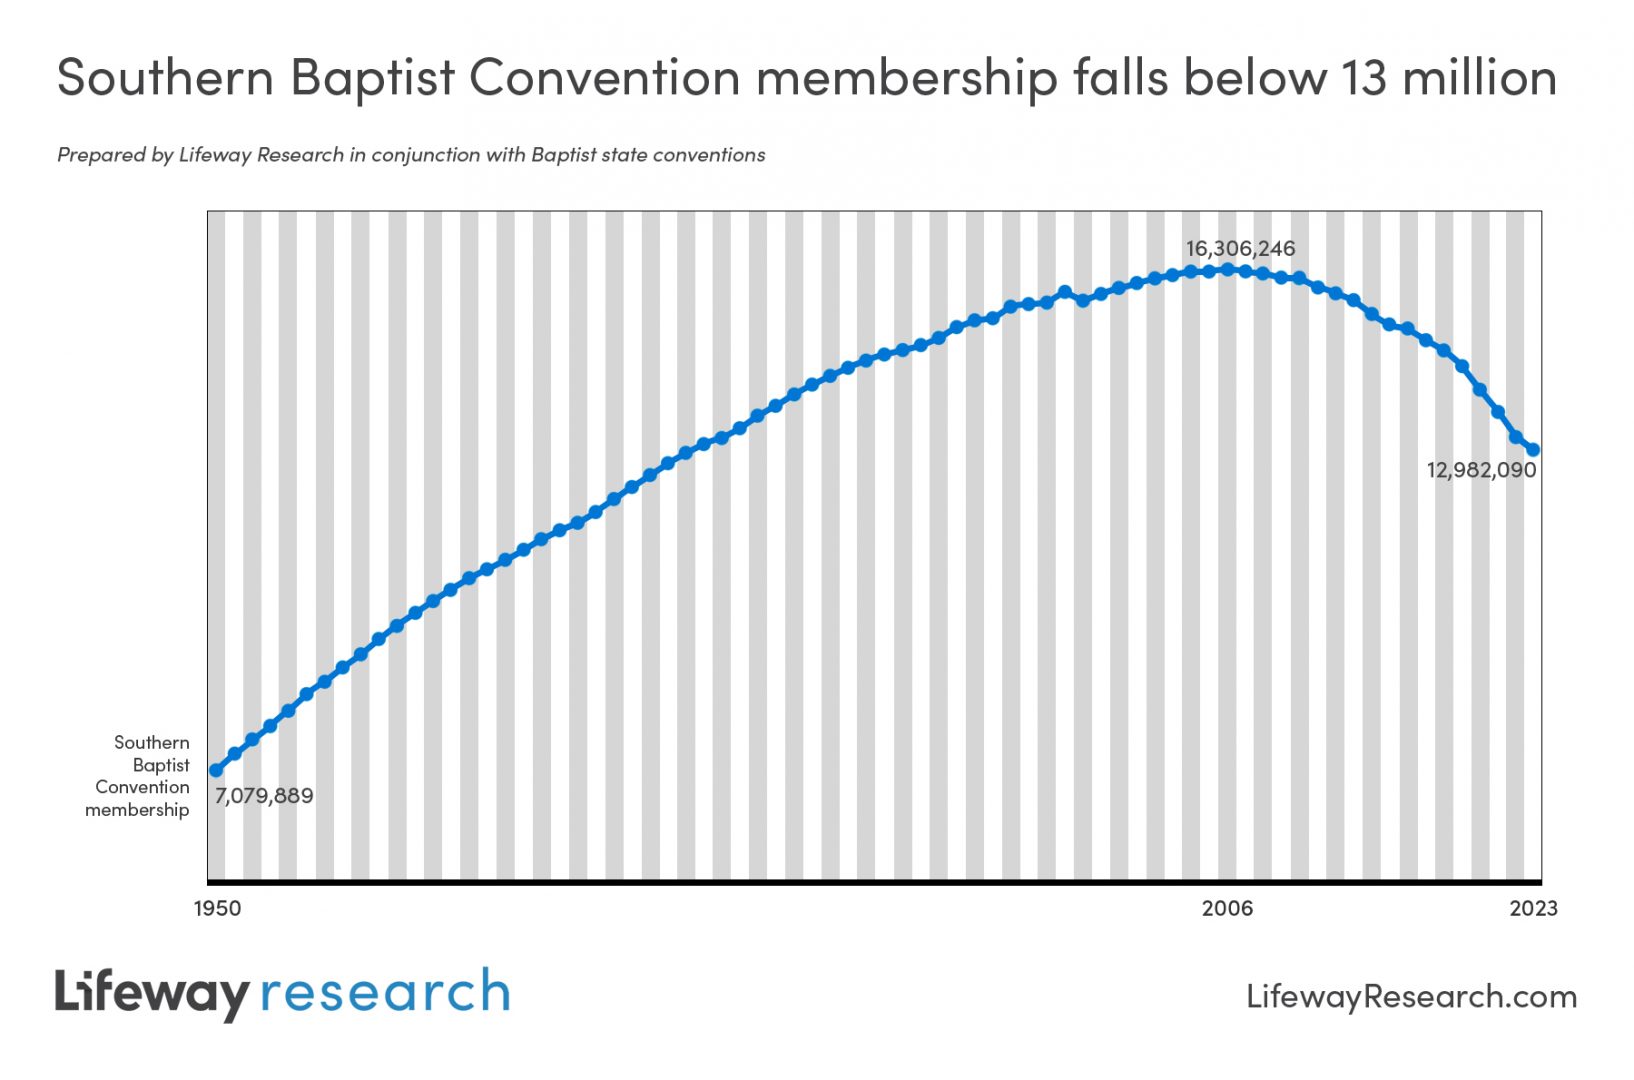 Southern Baptist baptisms and attendance grow, membership decline slows